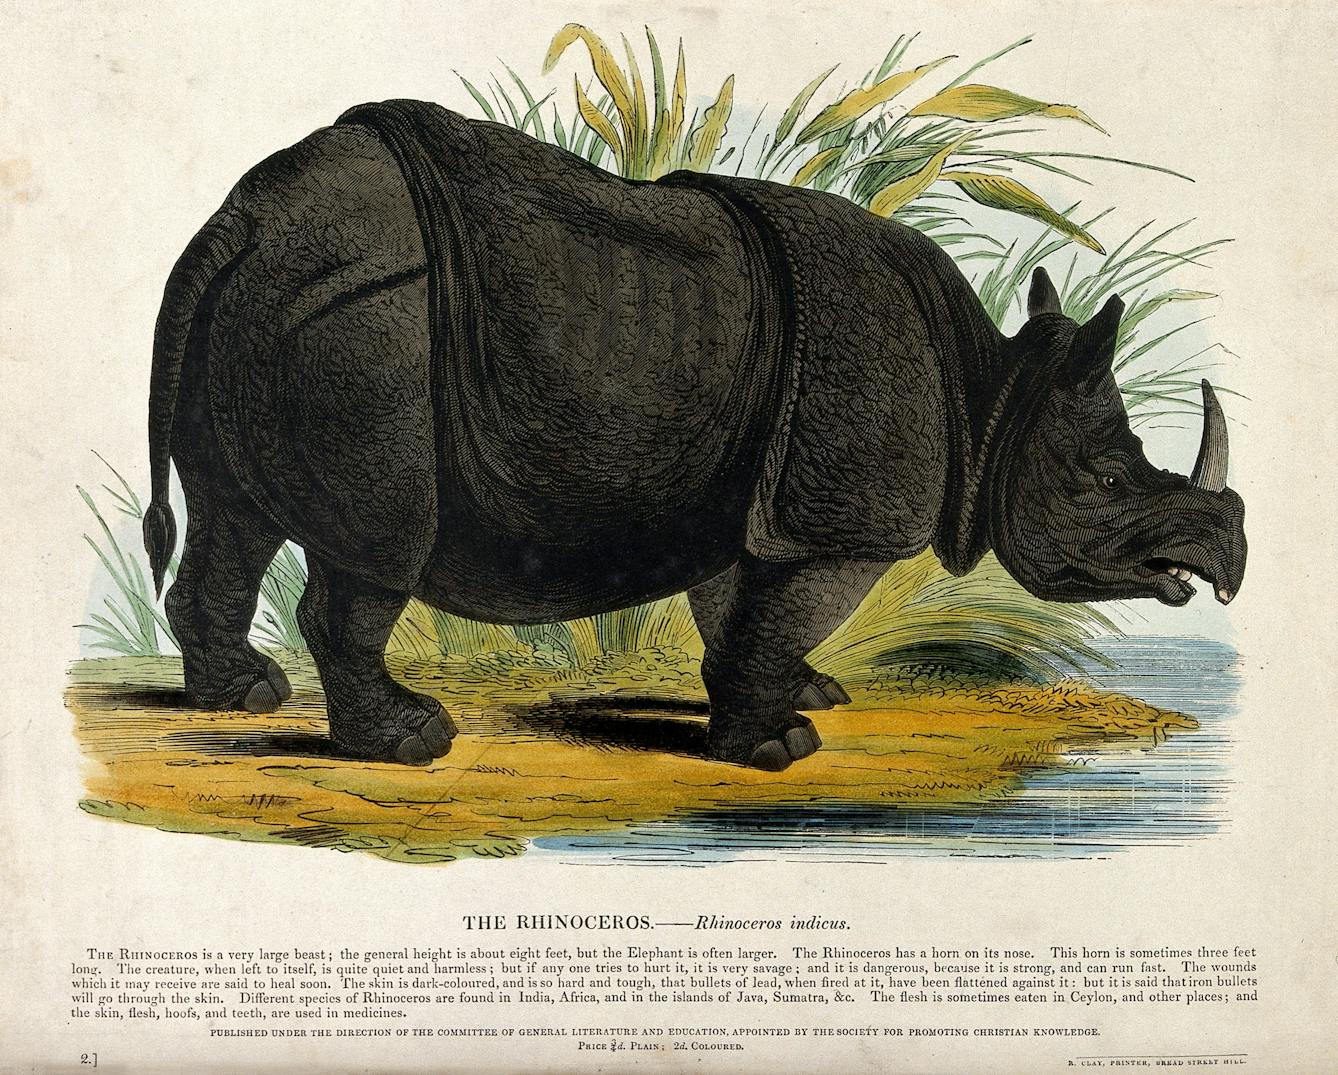 A rhinoceros standing on the shore of a lake